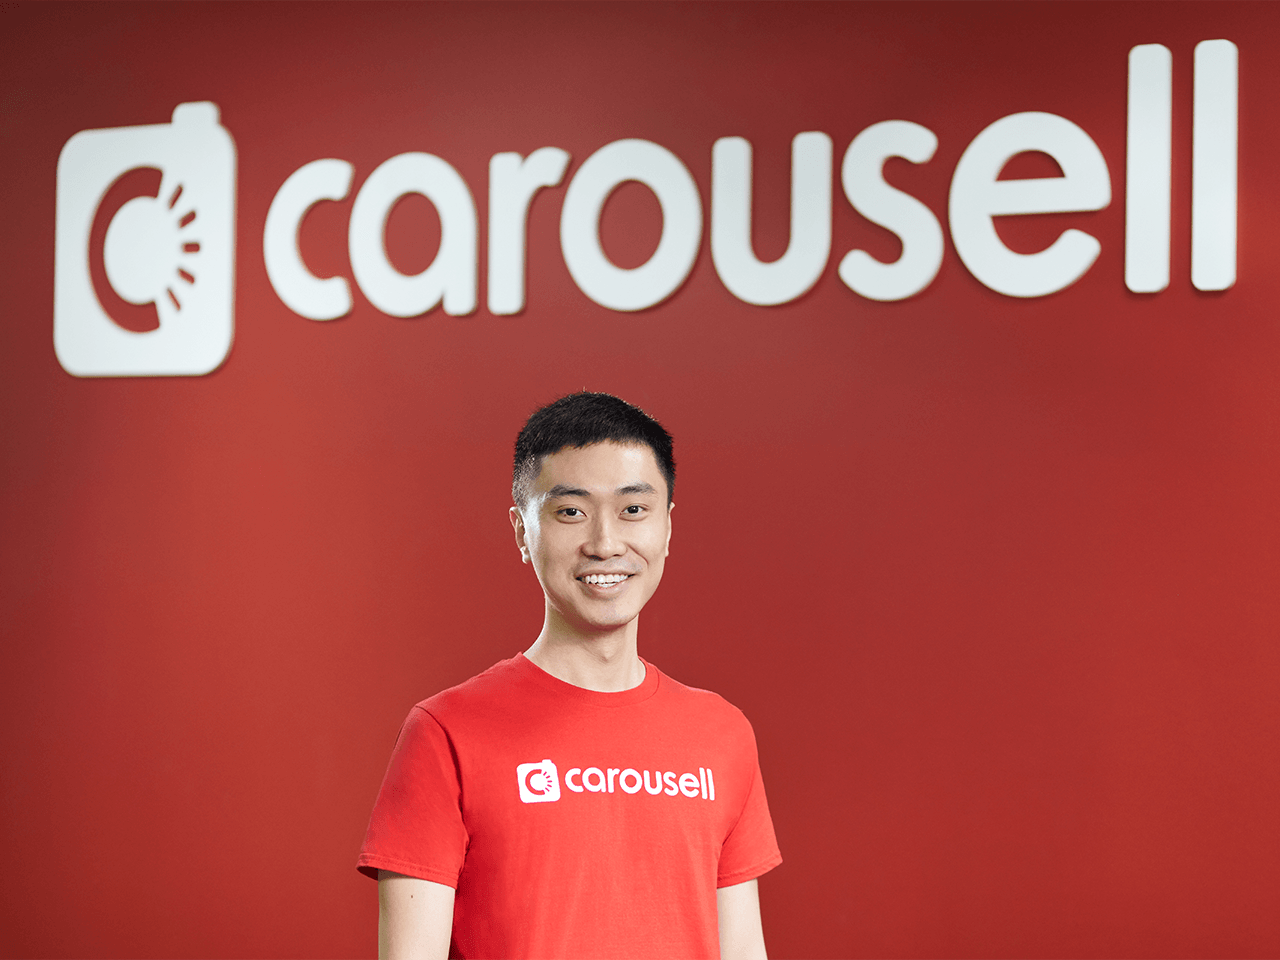 Carousell co-founder Lucas Ngoo to step down